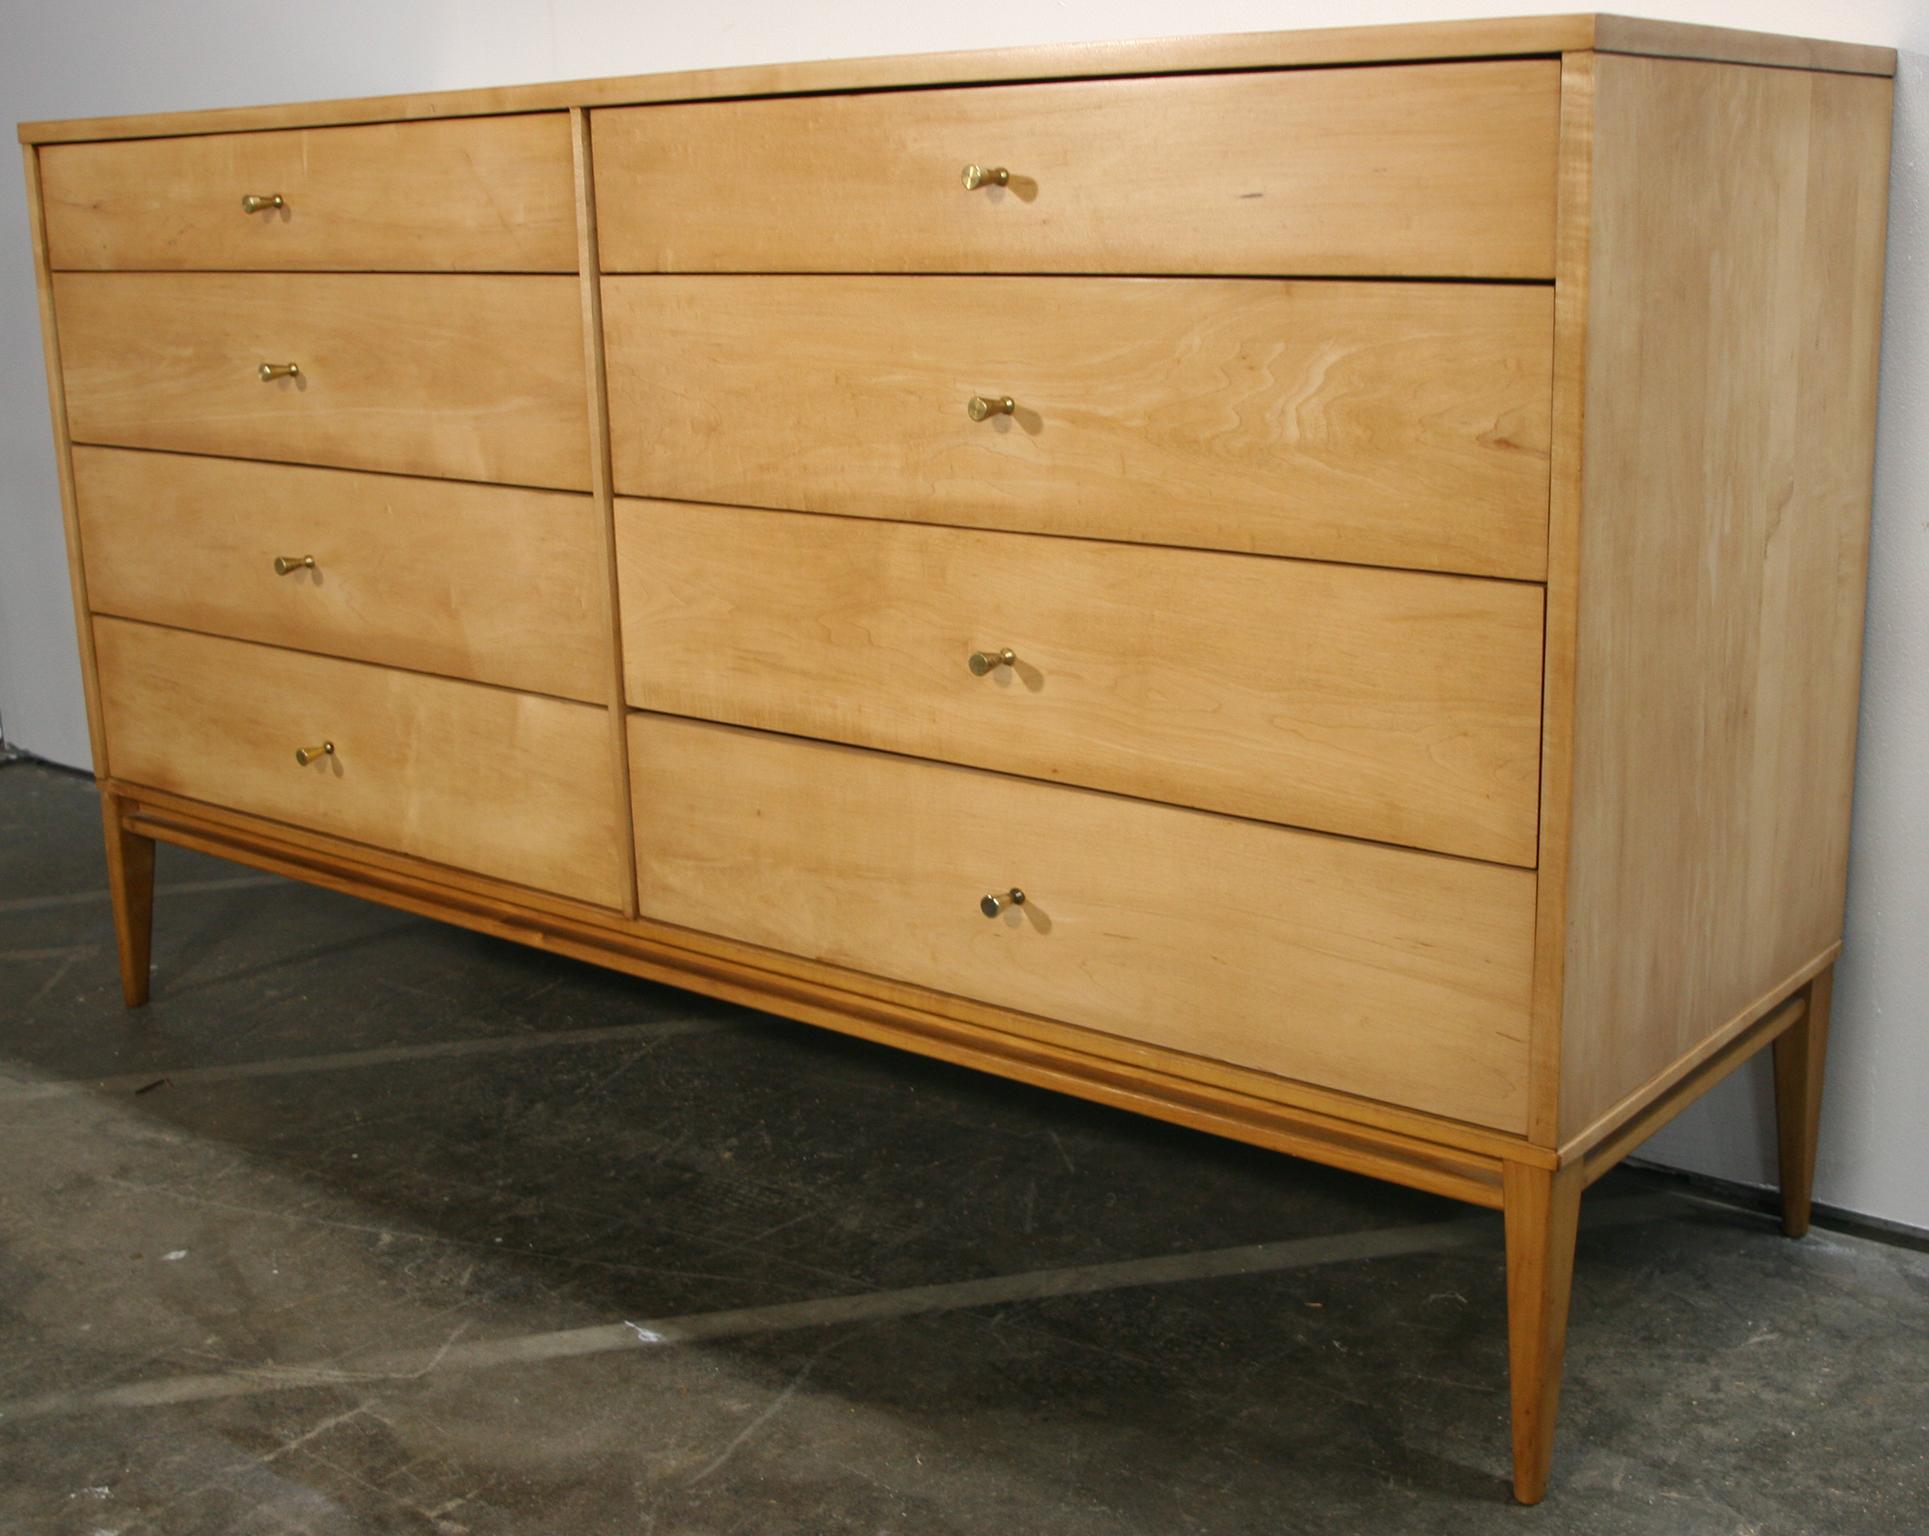 Vintage midcentury Paul McCobb 8-drawer dresser credenza Planner Group #1507. Beautiful dresser by Paul McCobb circa 1950s Planner Group, 8-drawer, solid maple, Brass cone pulls. Solid maple original base. Original foil label, clean inside and out.